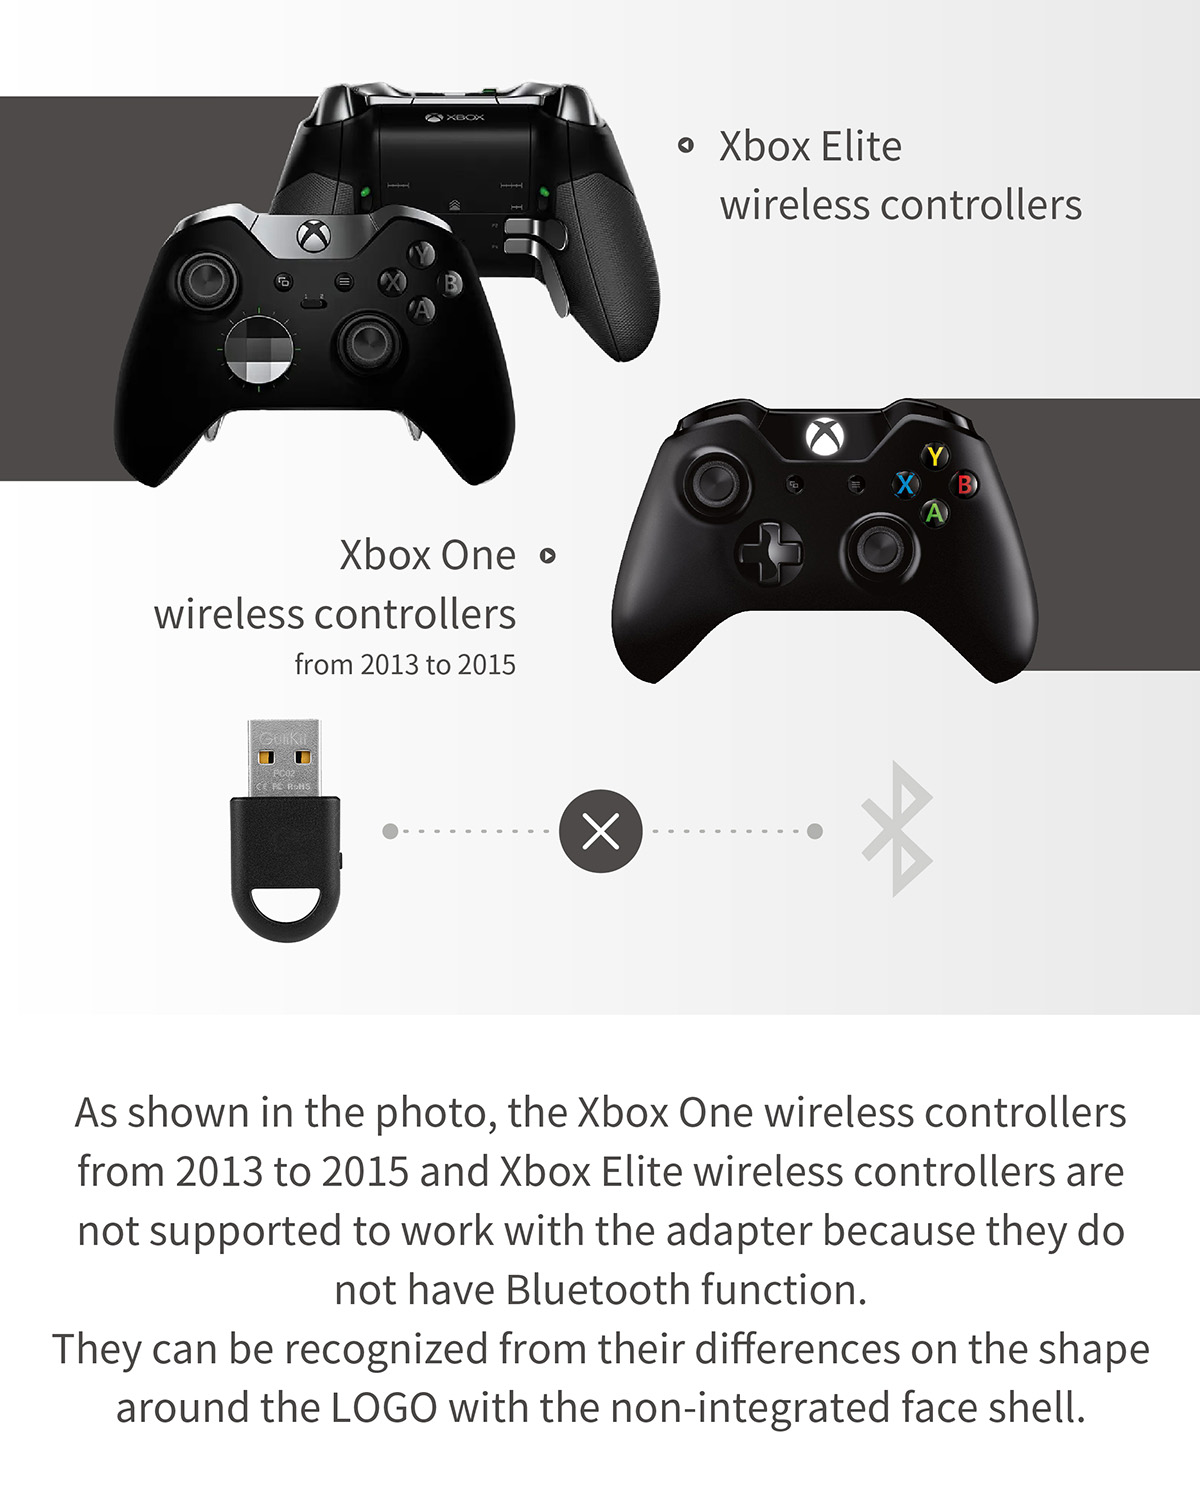 2.4G PC Wireless Adapter USB Receiver For Xbox One Wireless Controller  Adapter for Windows 7/